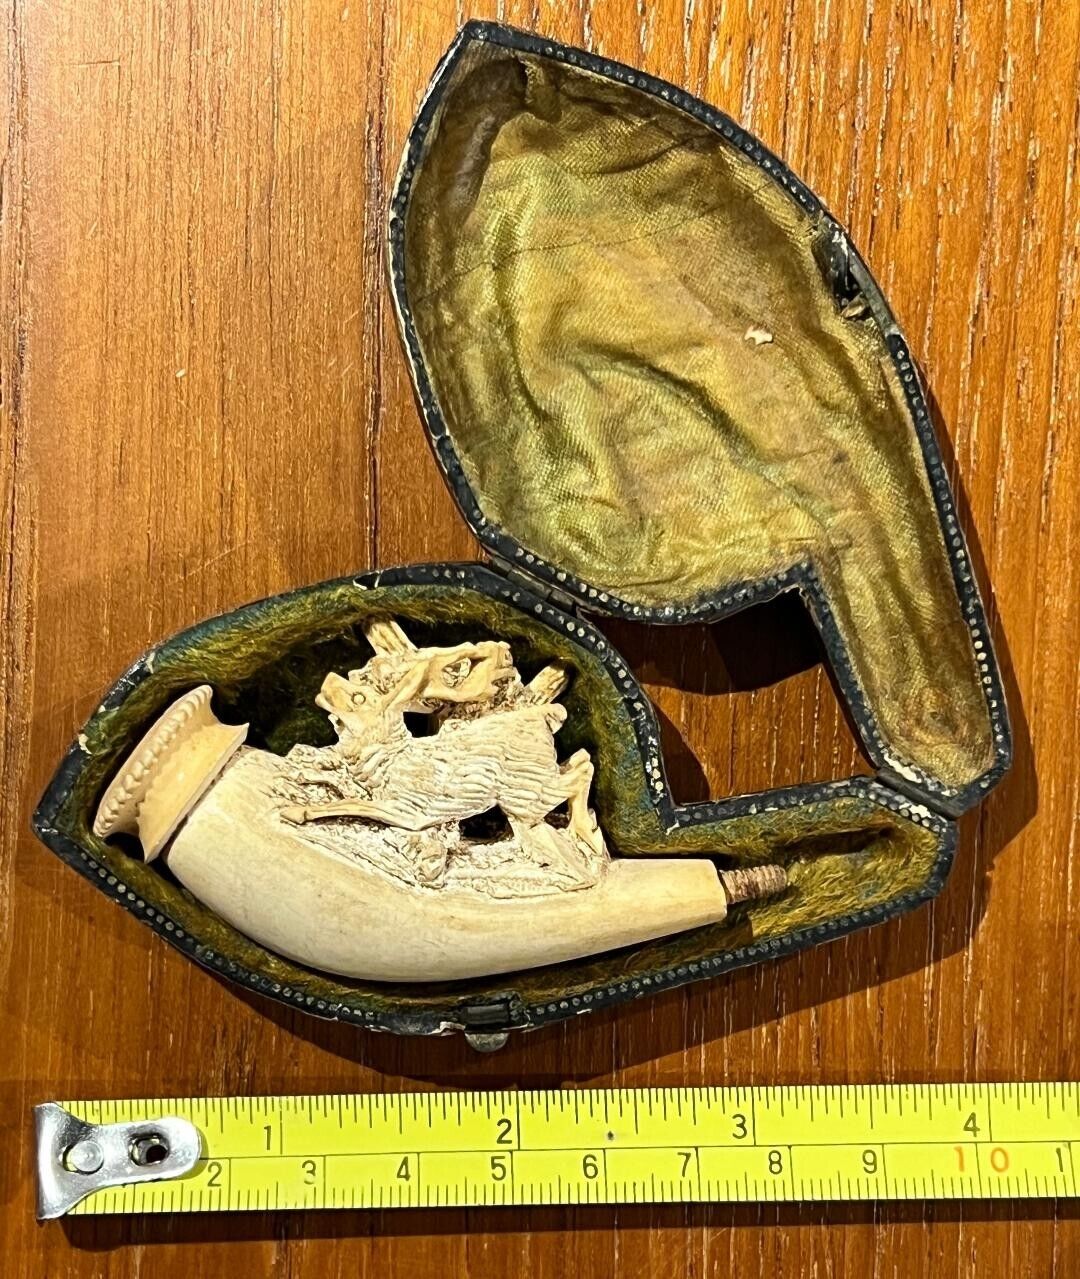 Antique Meerschaum Pipe With Custom Locking Snap Case, Featuring a  Deer or Stag